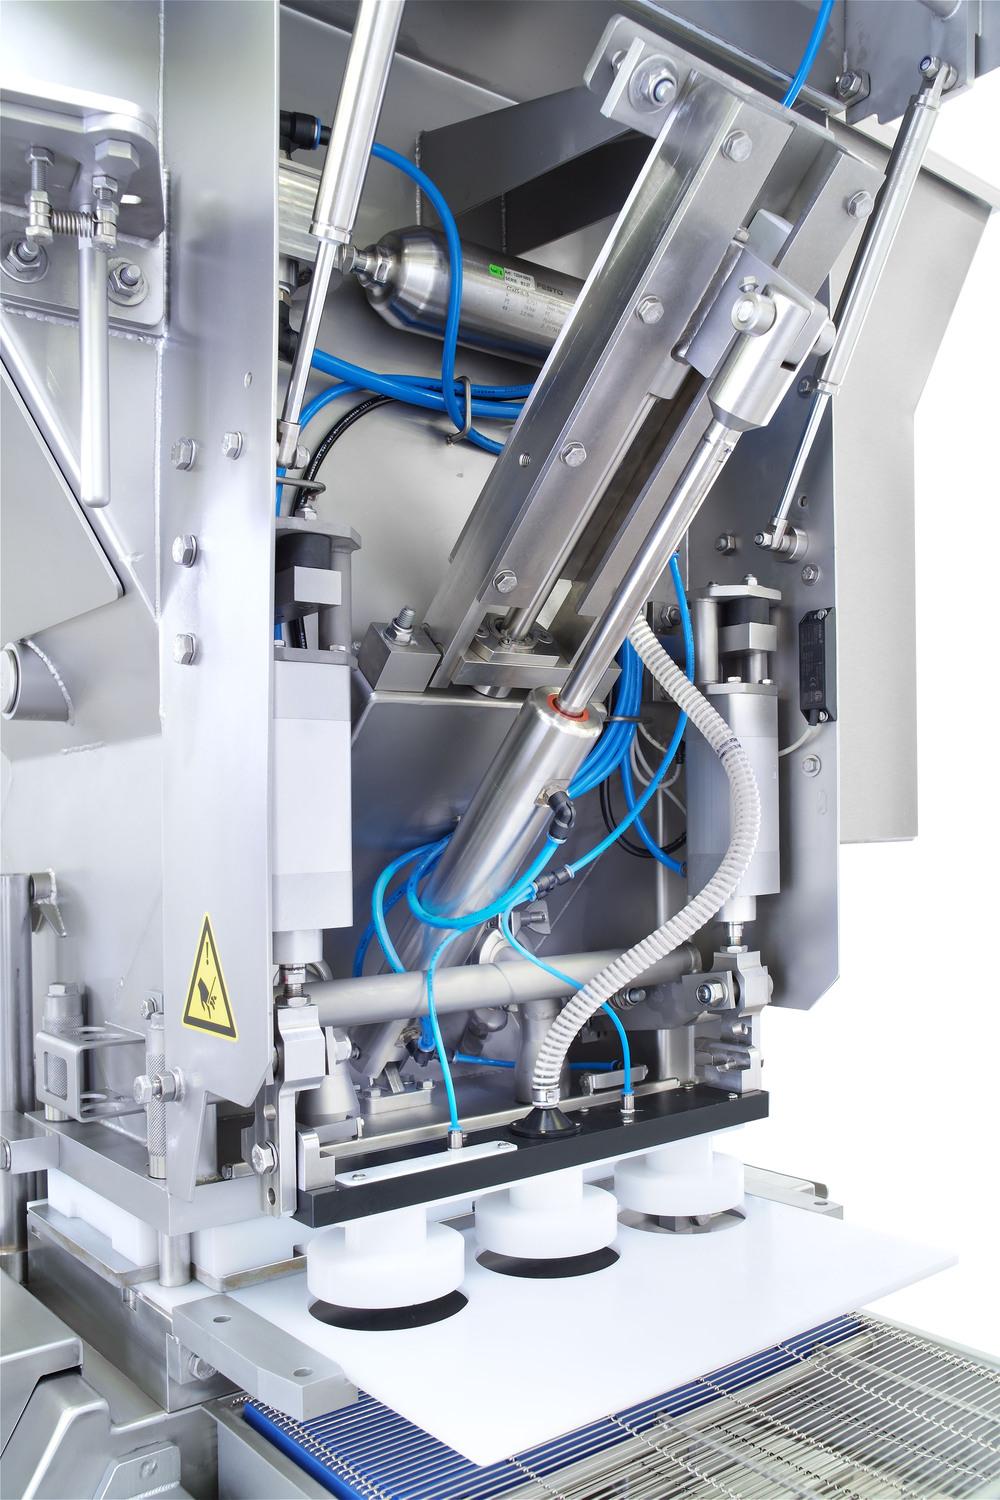 General info The GEA FreshFormer increases flexibility in fresh meat forming and saves money by significantly reducing the residue (giveaway) at changeover.